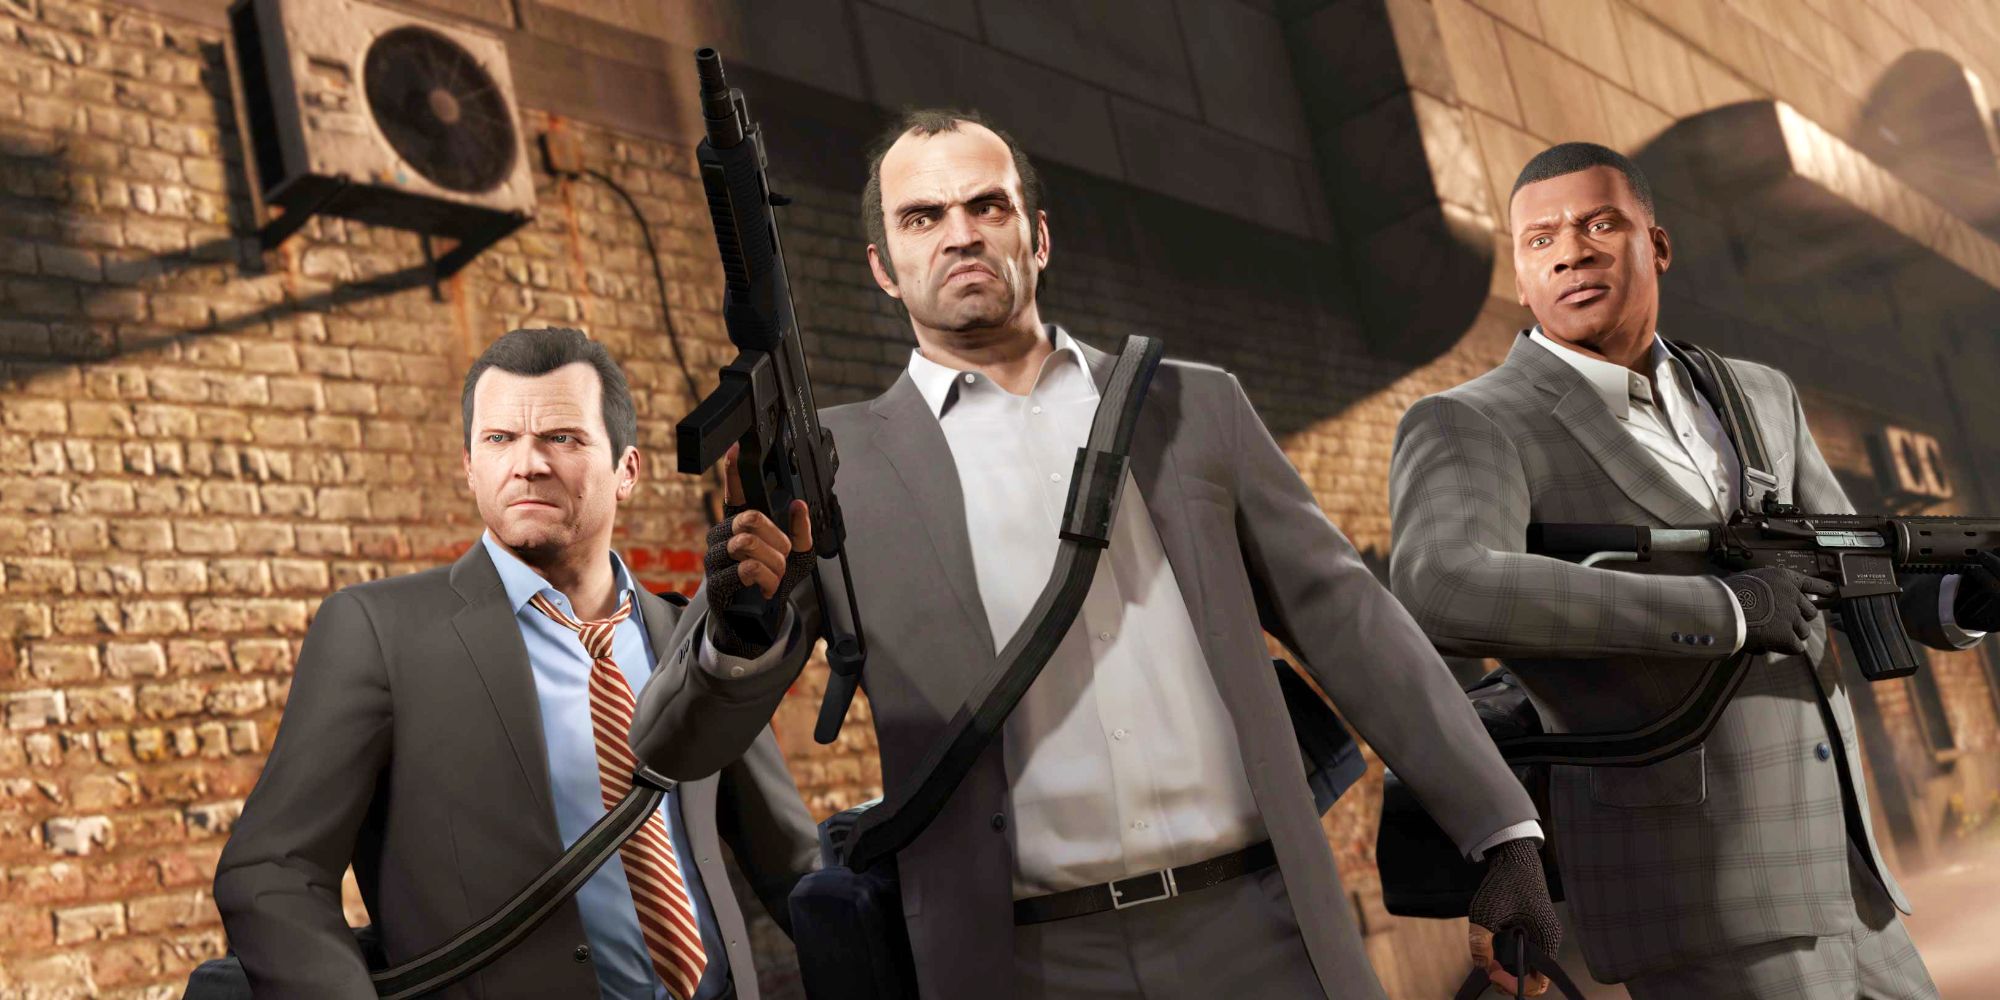 The three main characters of Grand Theft Auto 5: Michael, Trevor and Franklin.